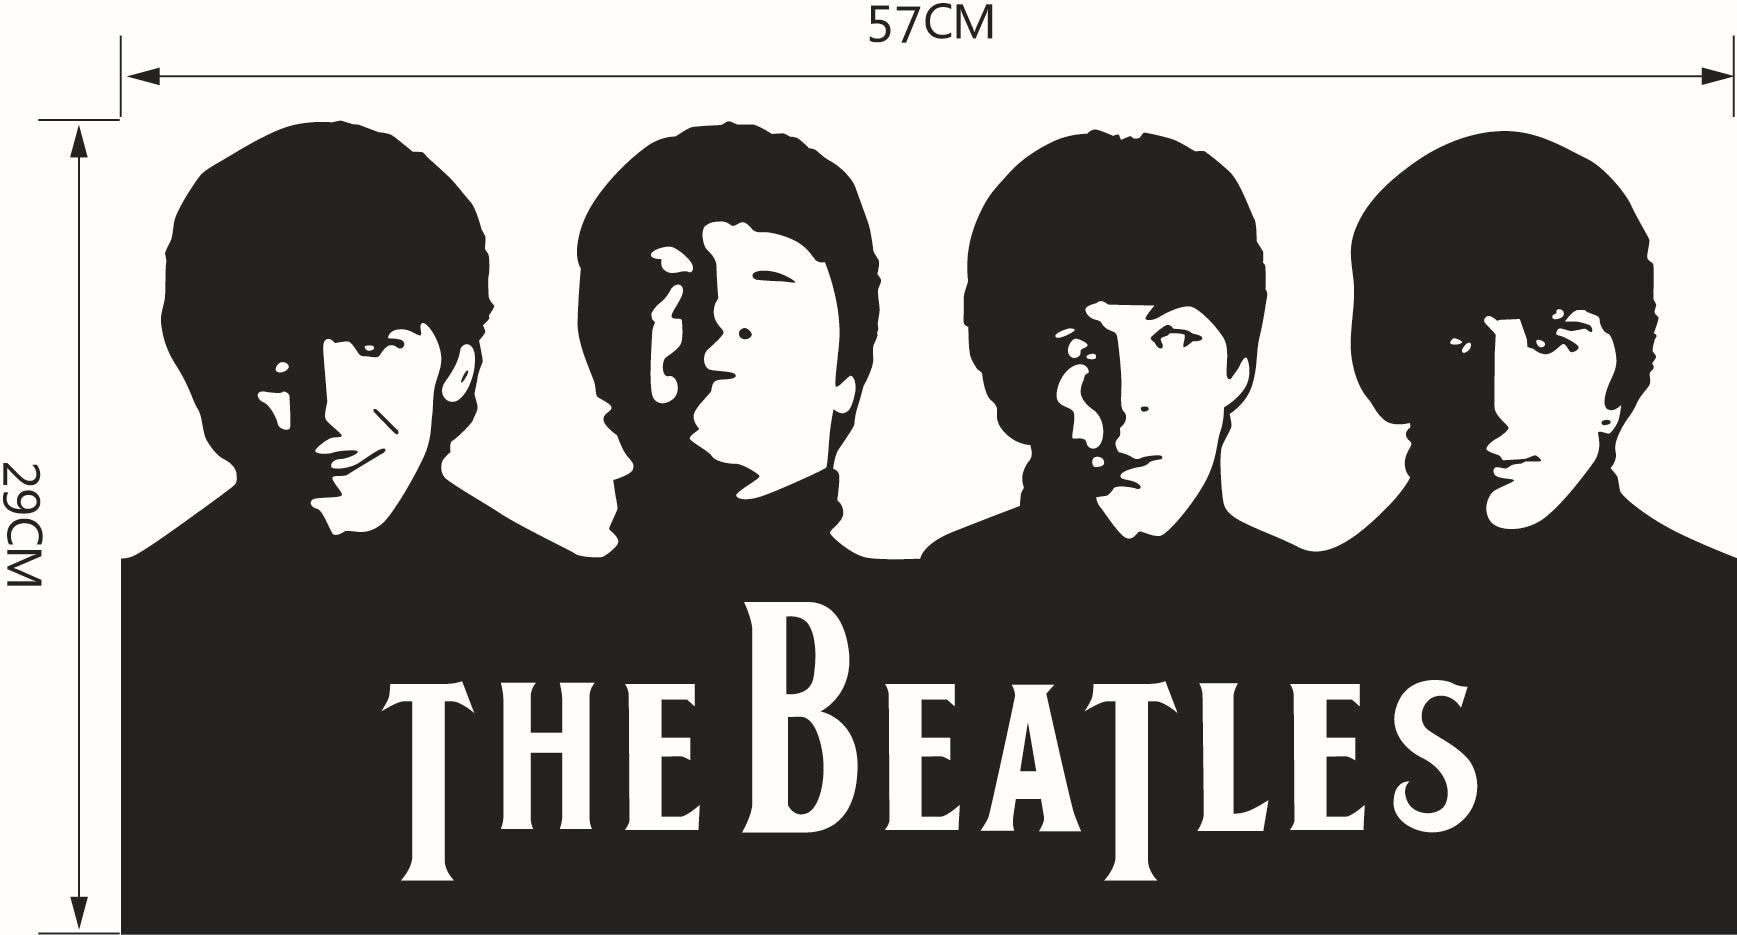 The Beatles Removable Wall Stickers Living Room Mural Decals DIY Home ...